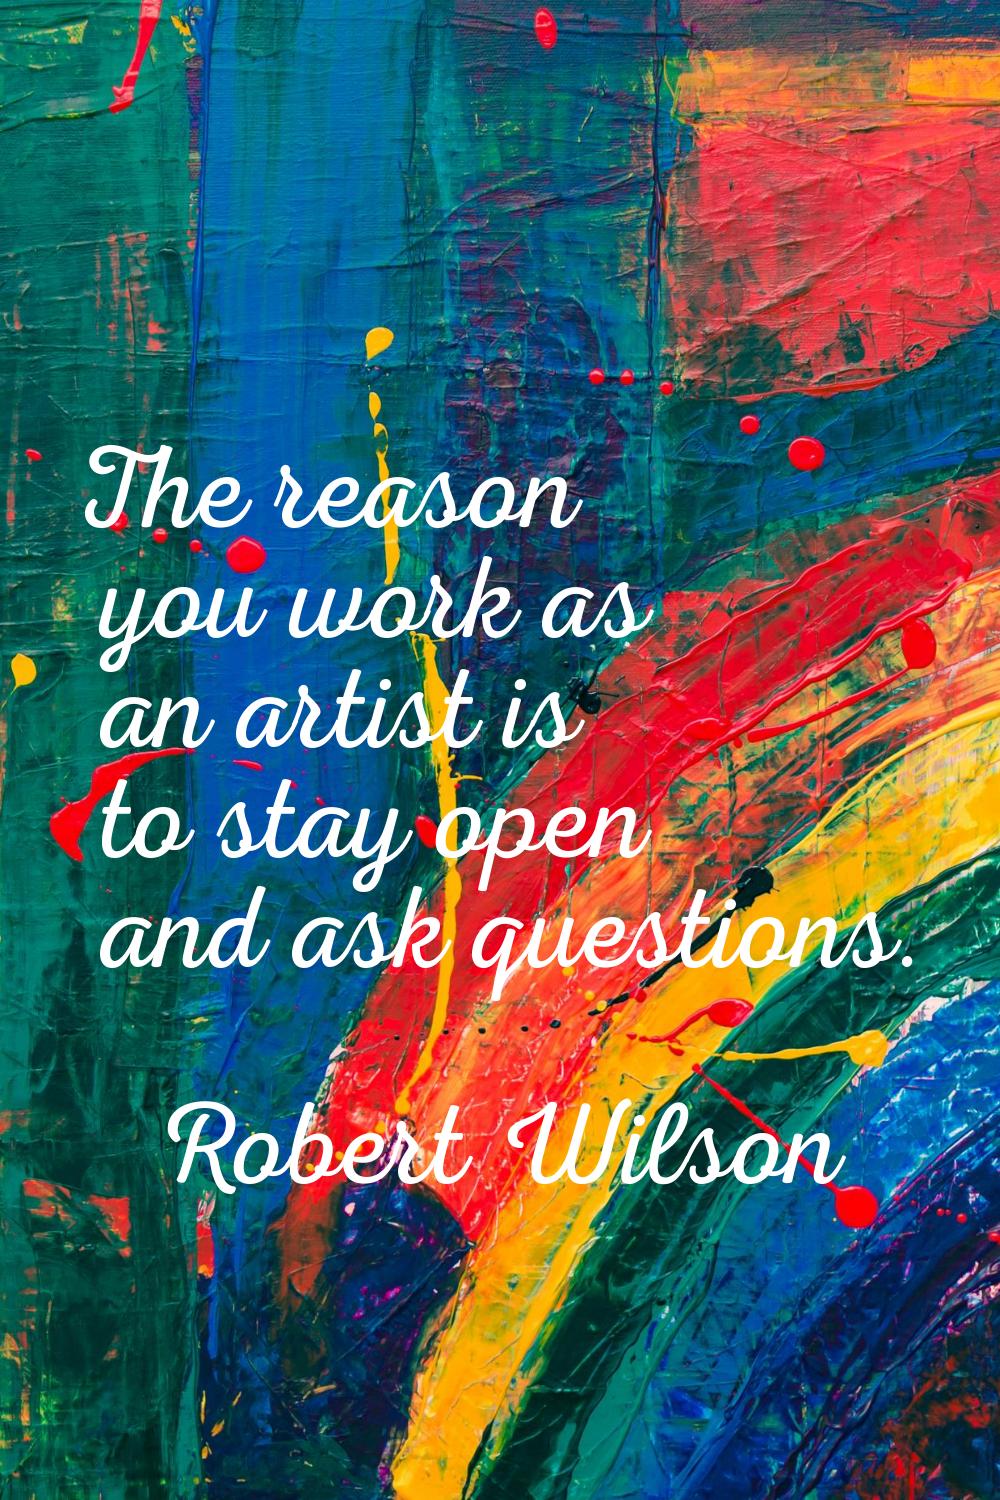 The reason you work as an artist is to stay open and ask questions.